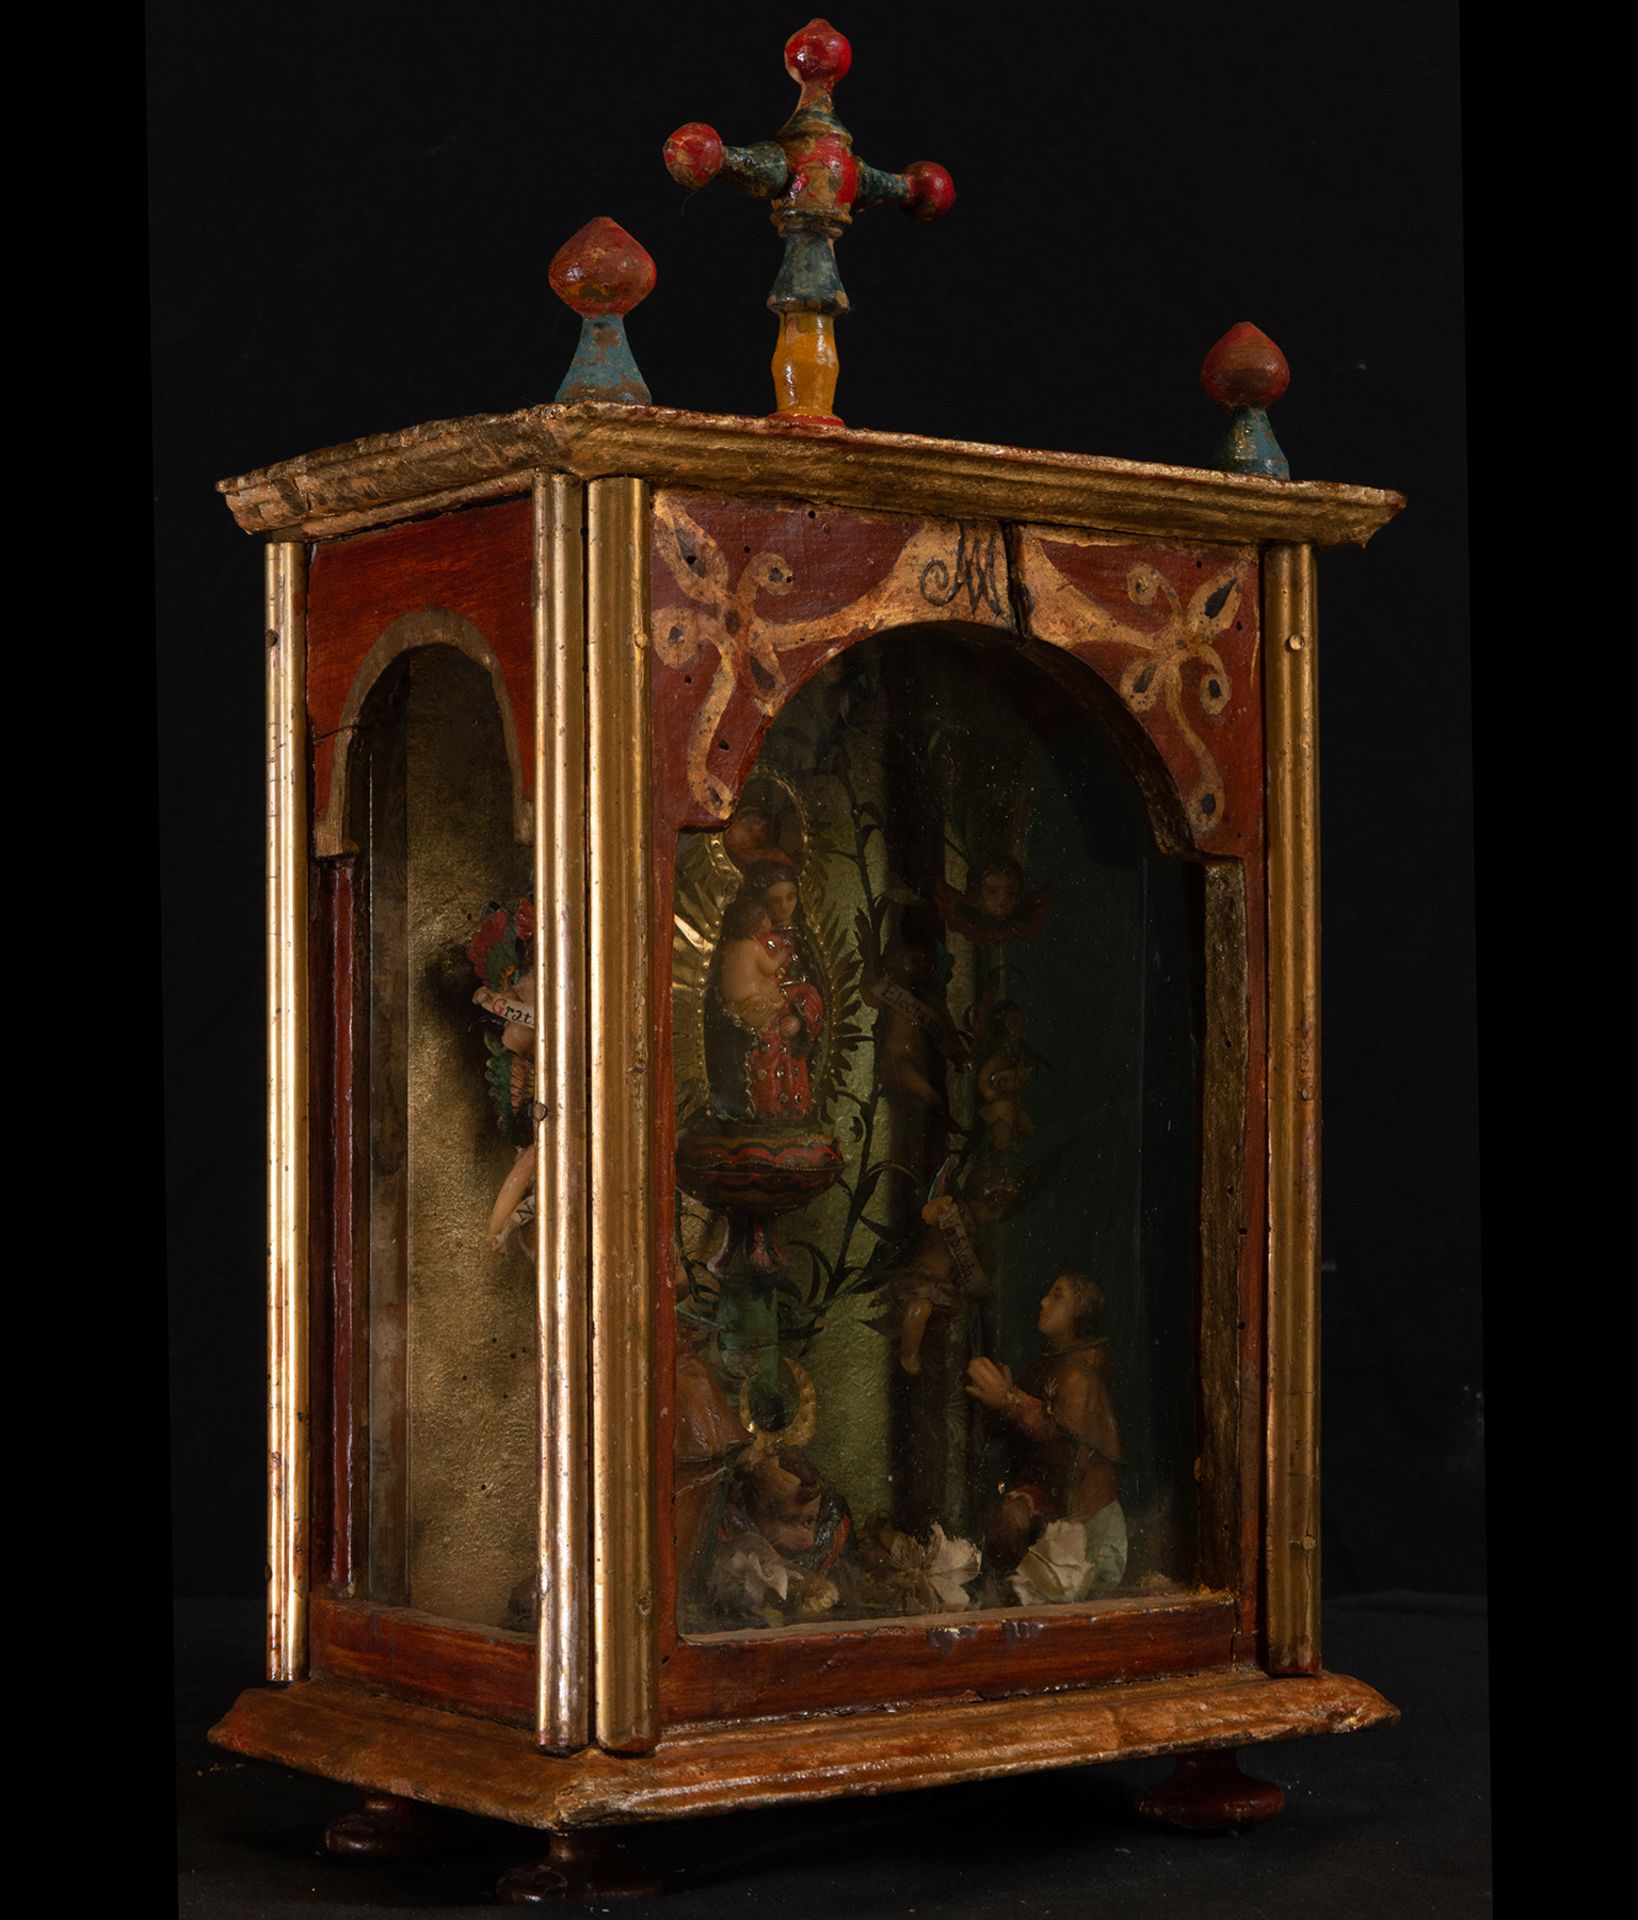 Unusual colonial ensemble of Urn with Virgin of Pilar and Parsonnages in wax, Mexican colonial work  - Image 5 of 6